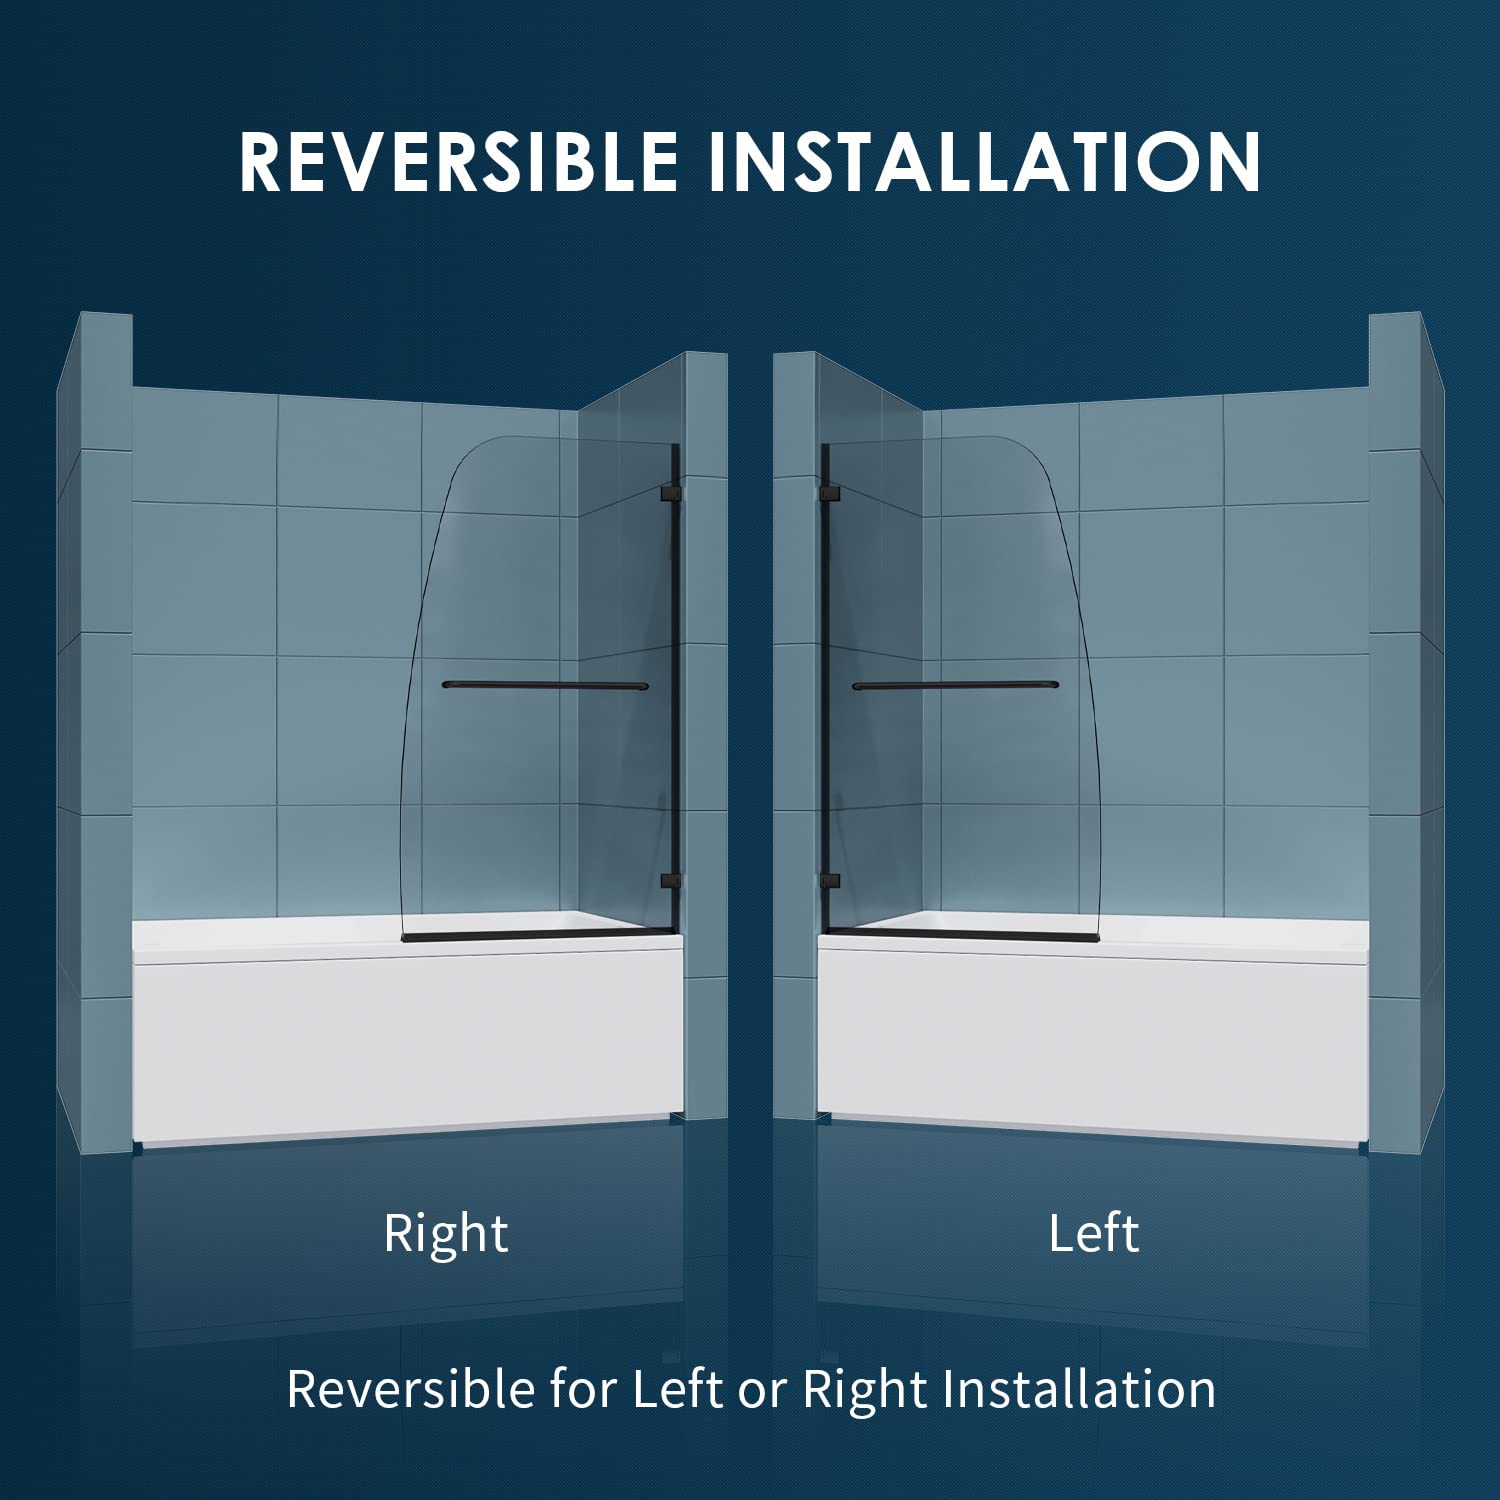 Reversible for left or right installation